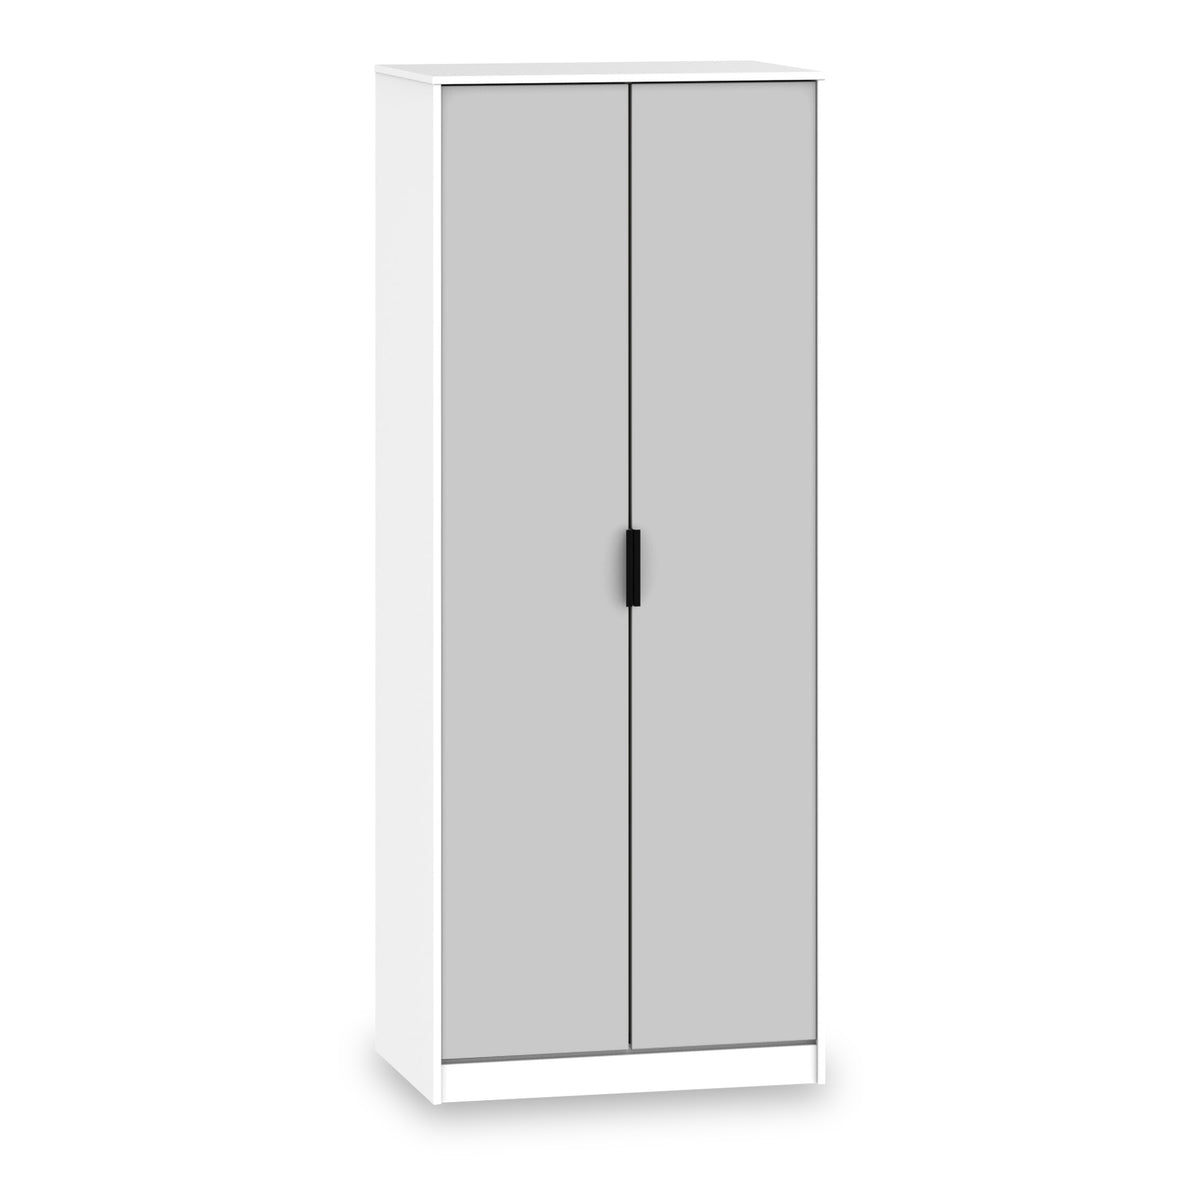 Asher White and Grey 2 Door Double Wardrobe from Roseland